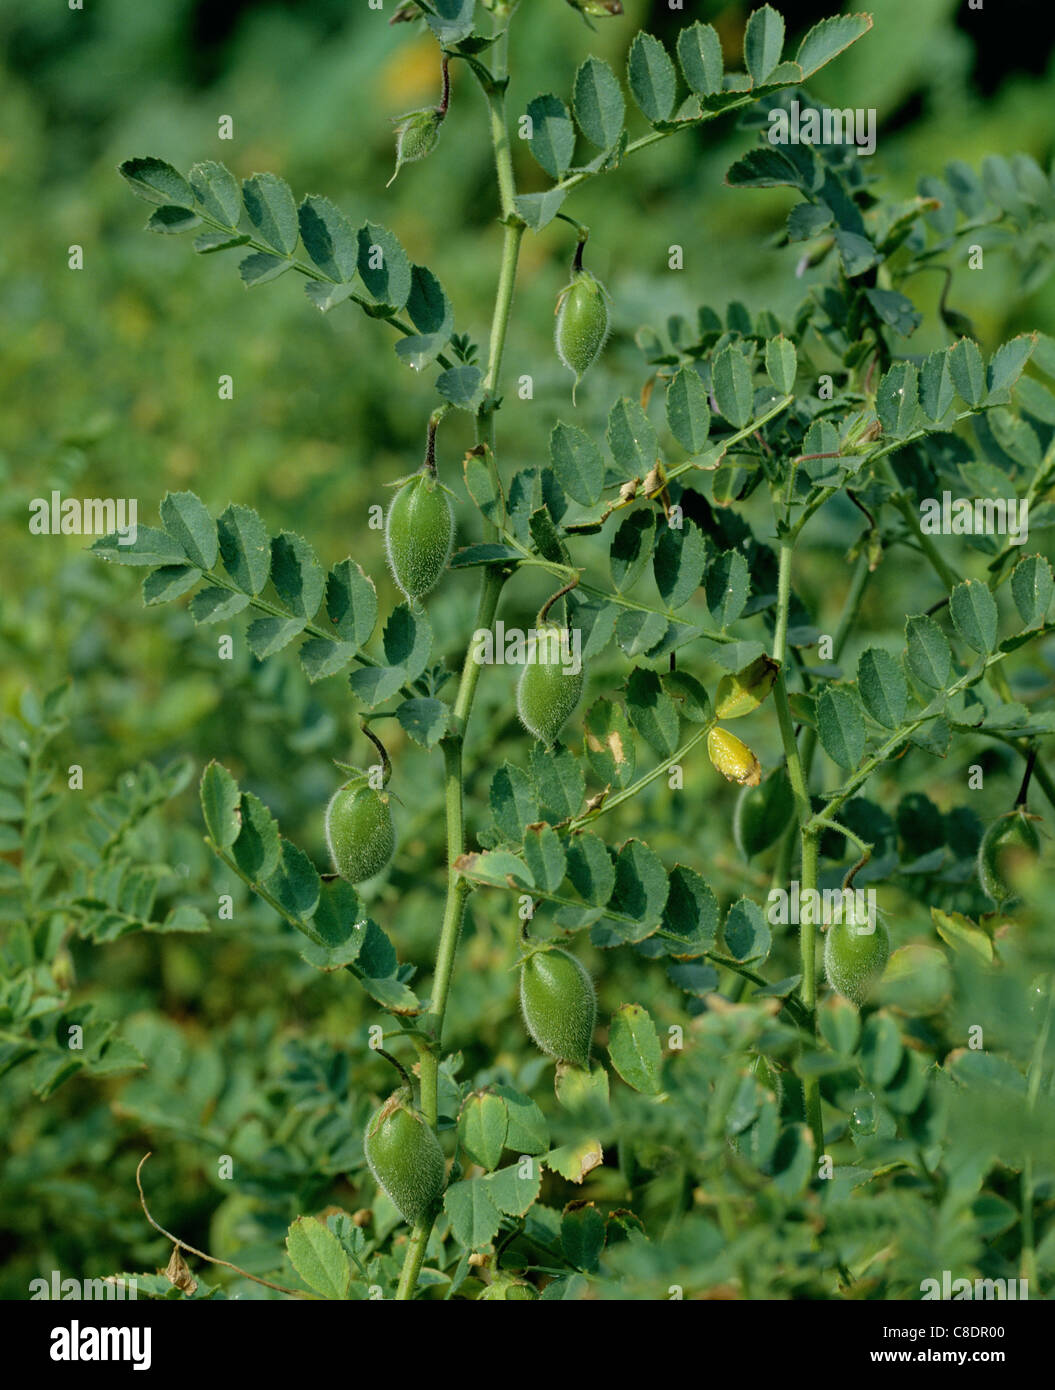 Mature but not ripe pods of chickpeas variety Kabuli Stock Photo